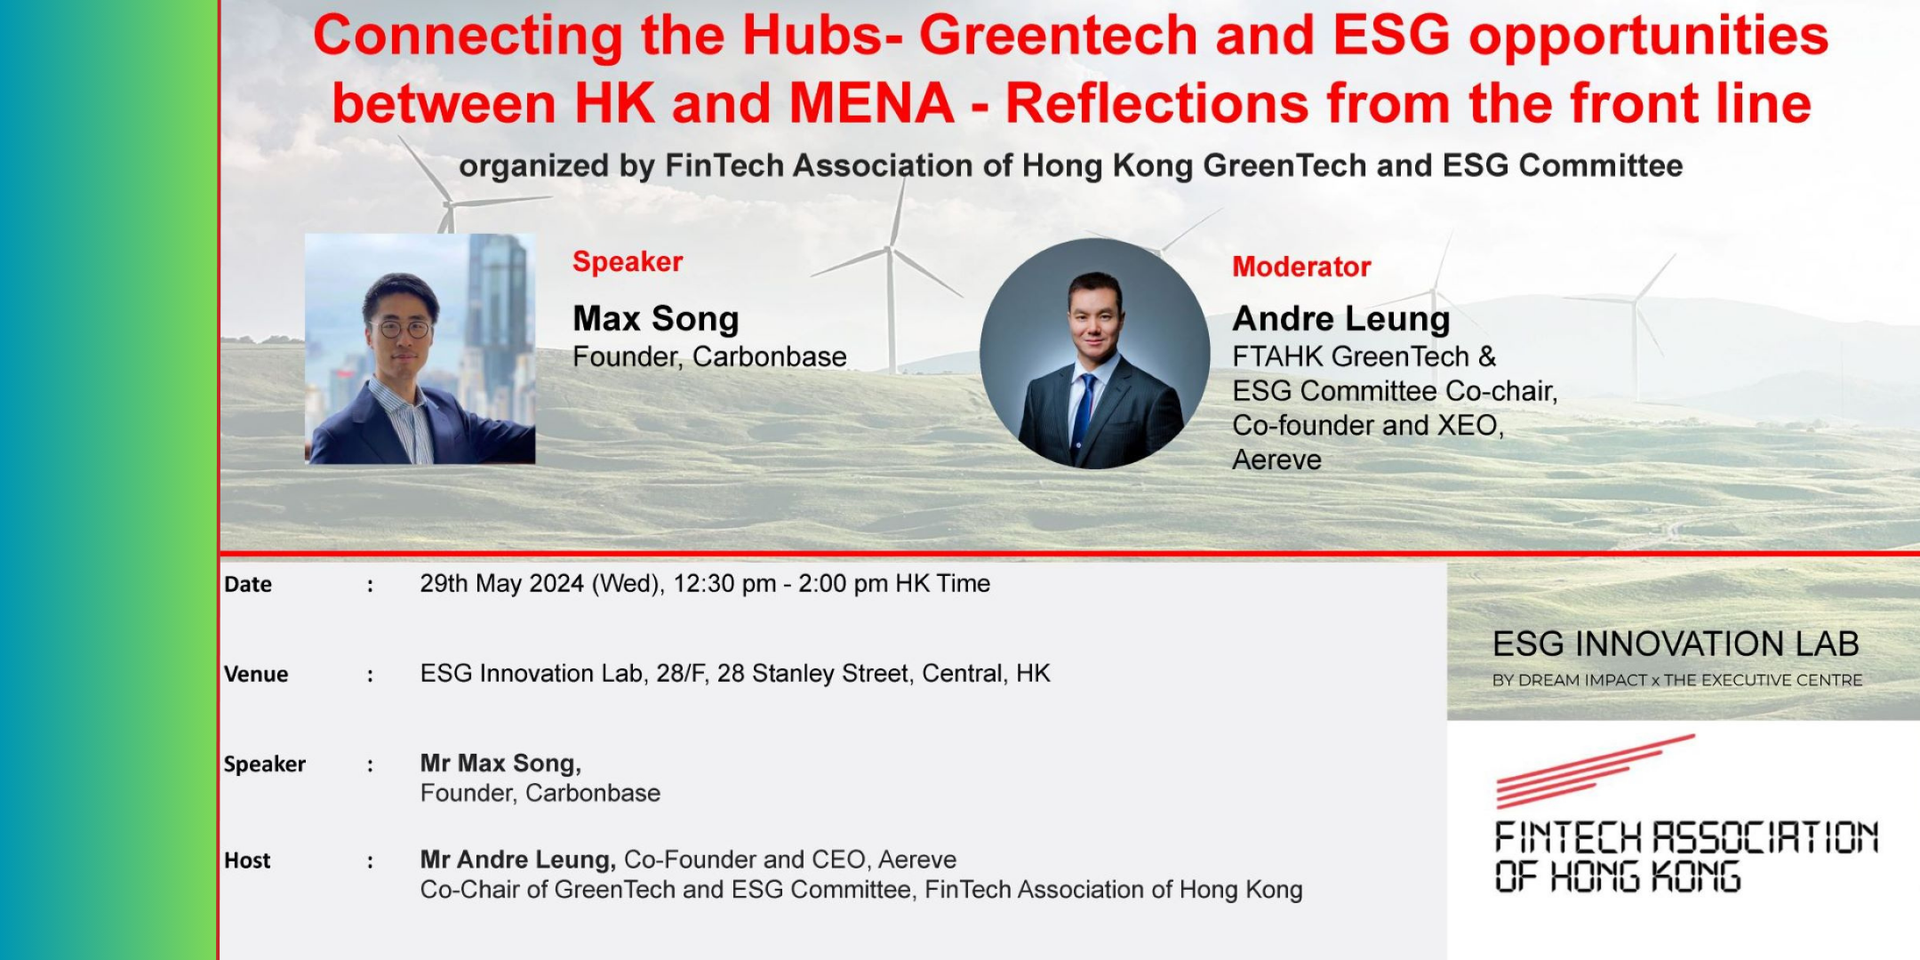 thumbnails FTAHK GreenTech & ESG: Connecting the Hubs- Greentech and ESG opportunities between HK & MENA - Reflections from the front line